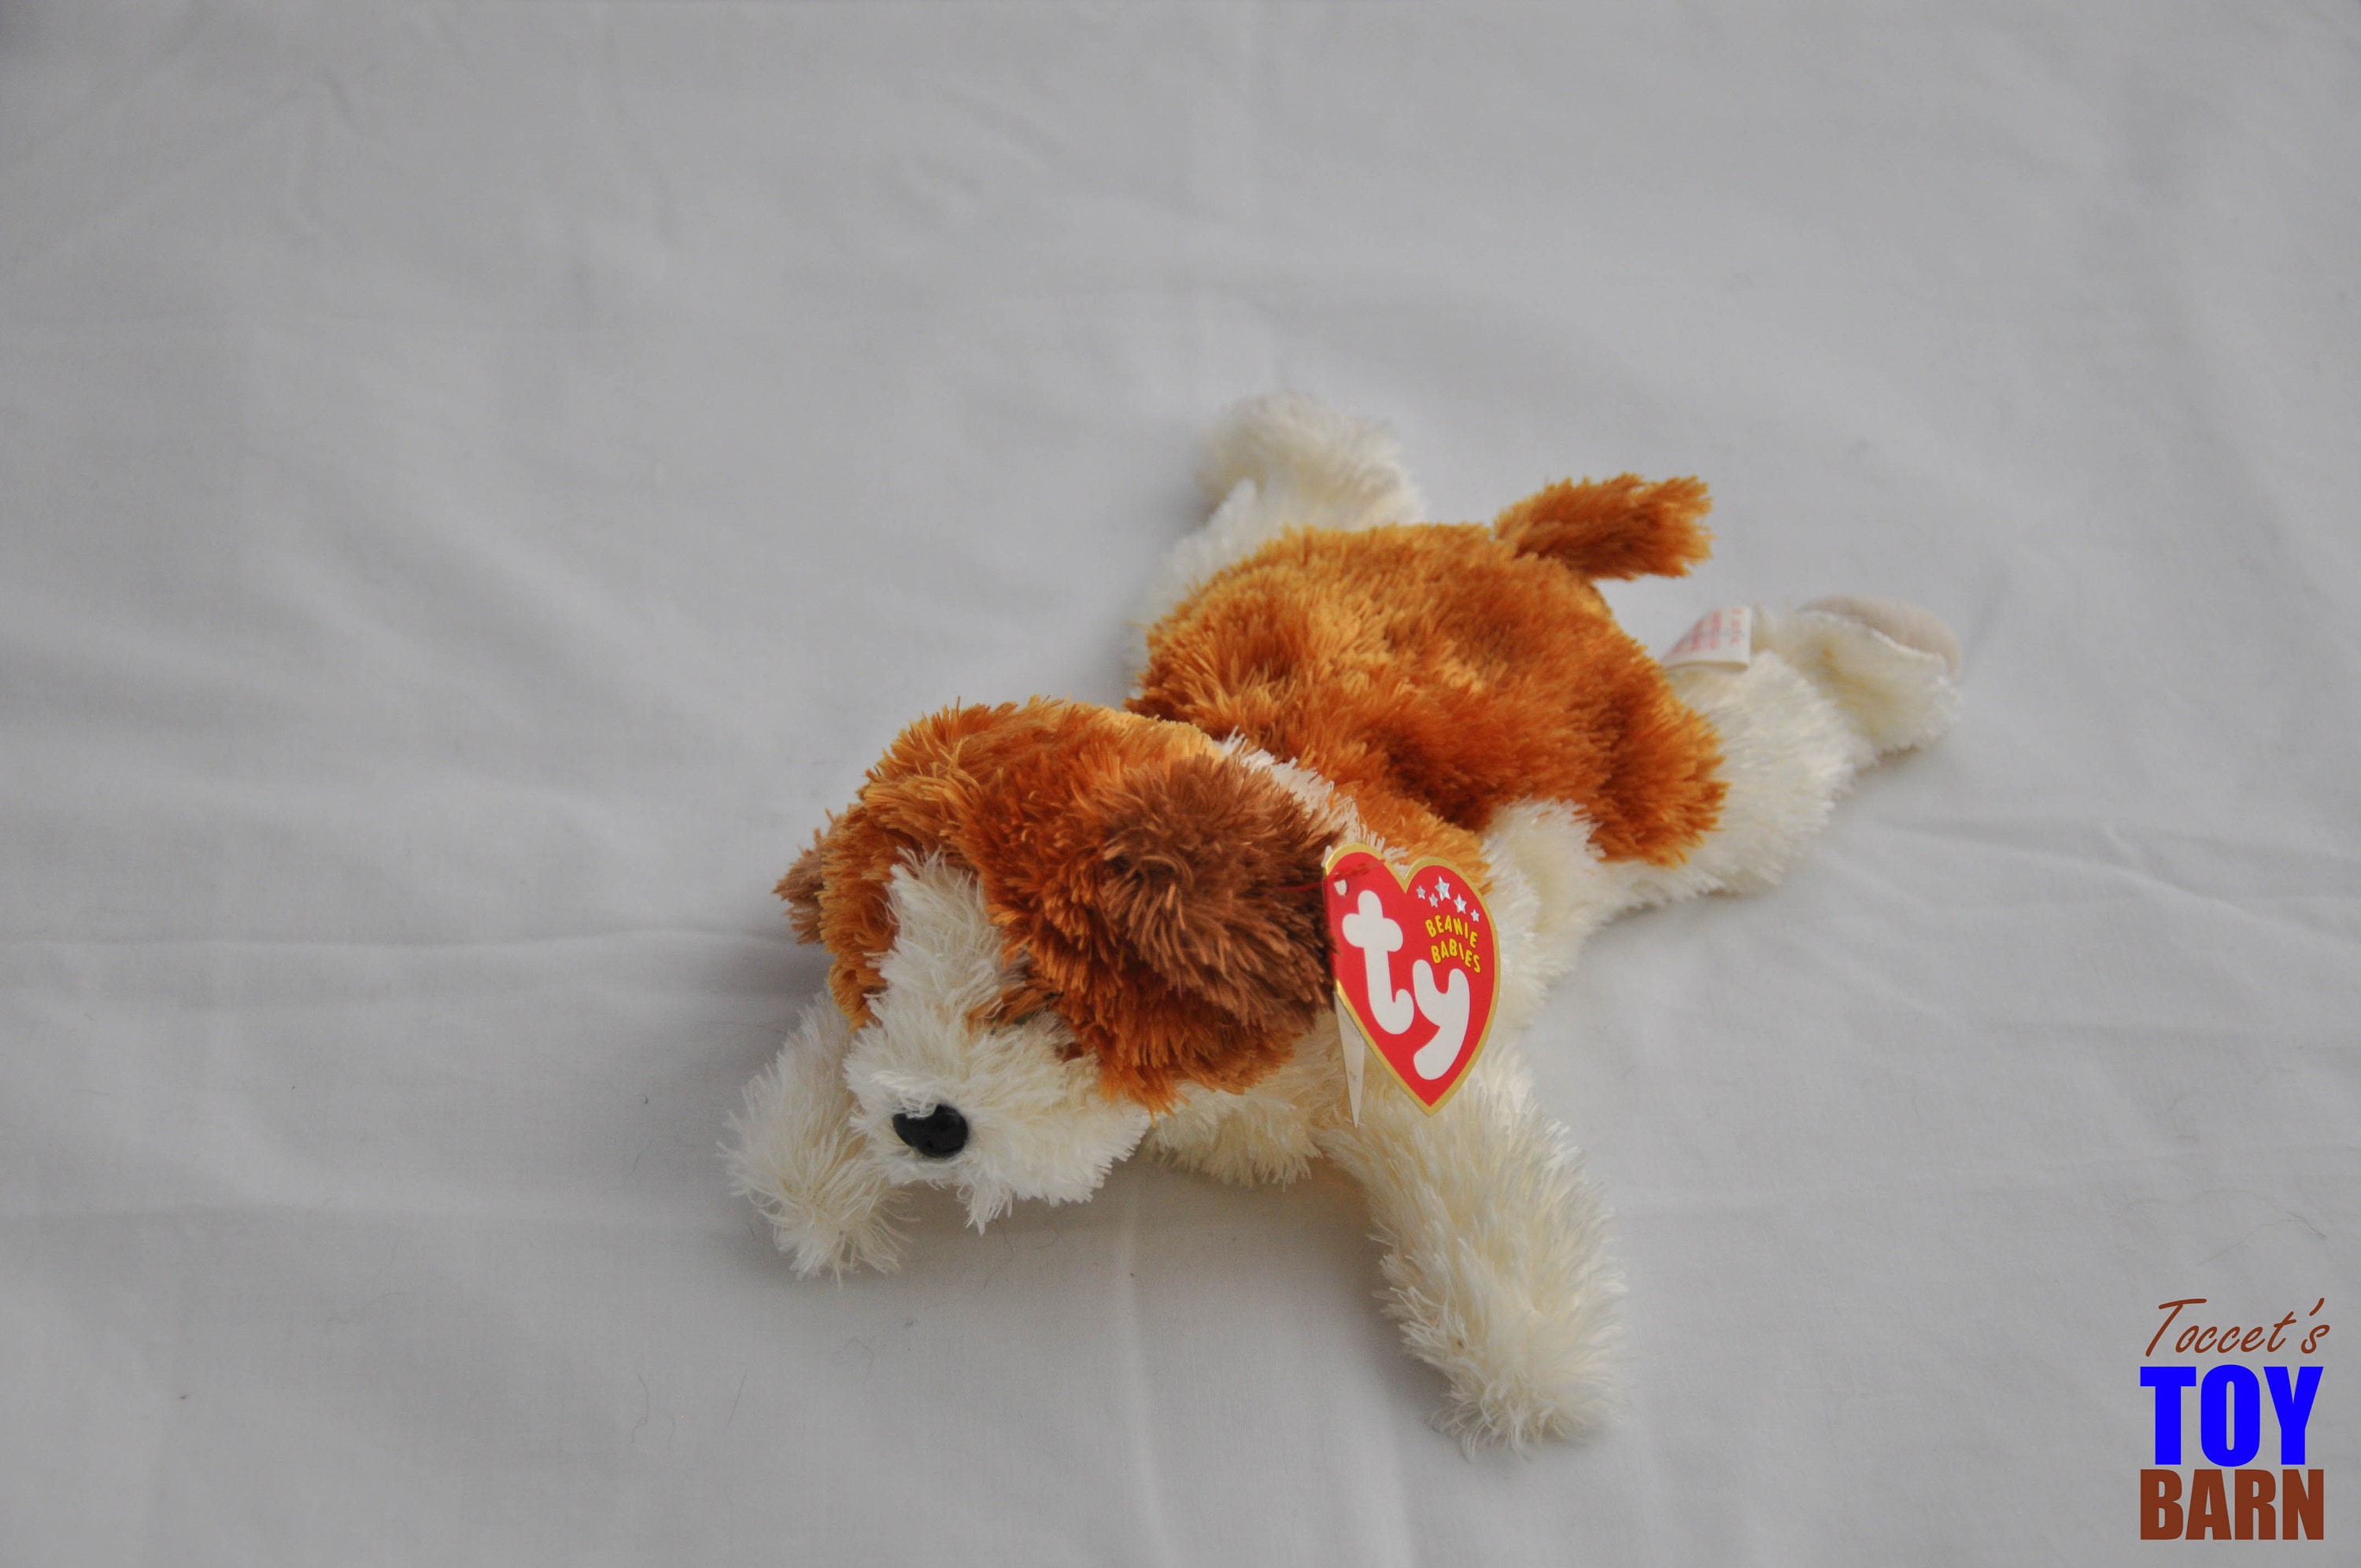 2002 Ty Beanie Baby 11th Generation Sport Dog #4590 Retired MWT for sale online